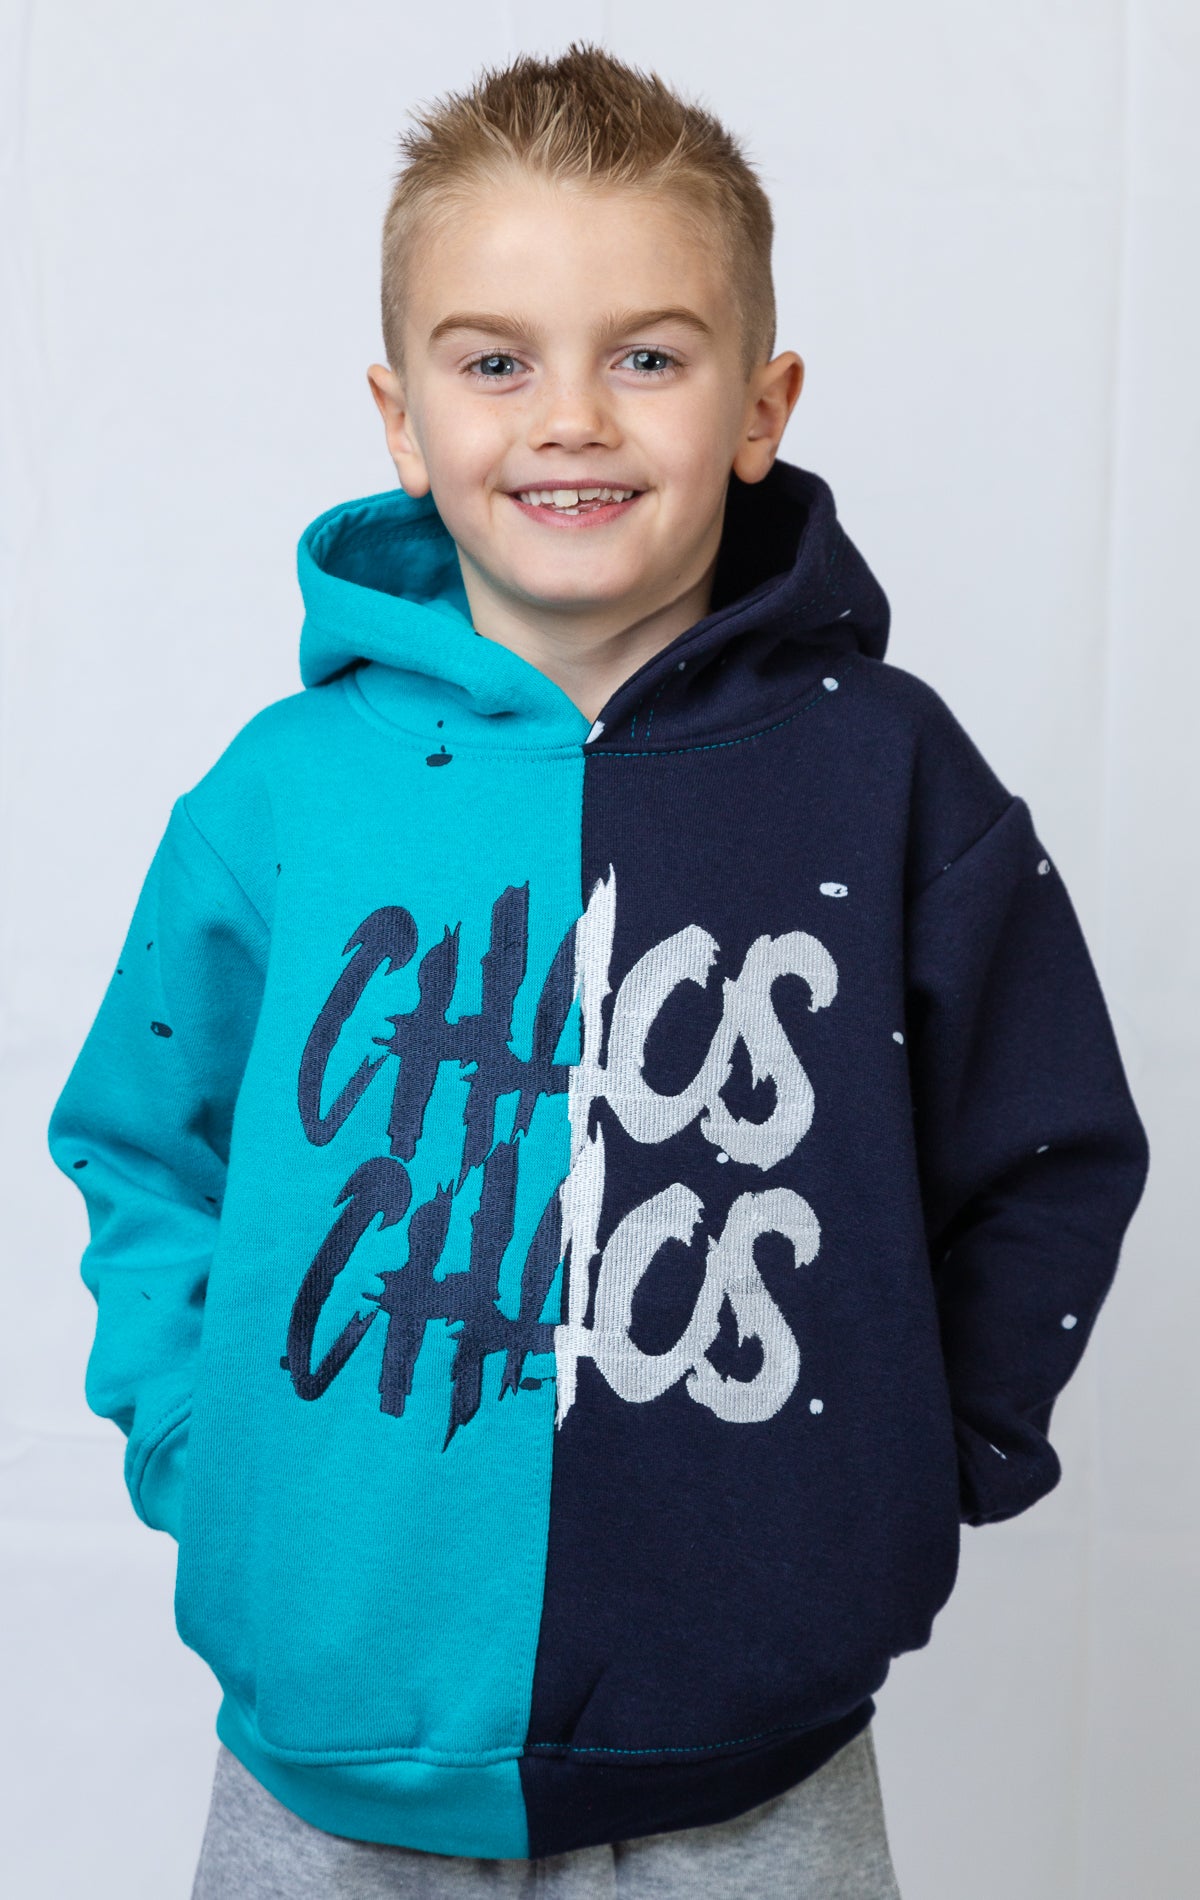 Chaos Chaos graphic hoodie for kids.